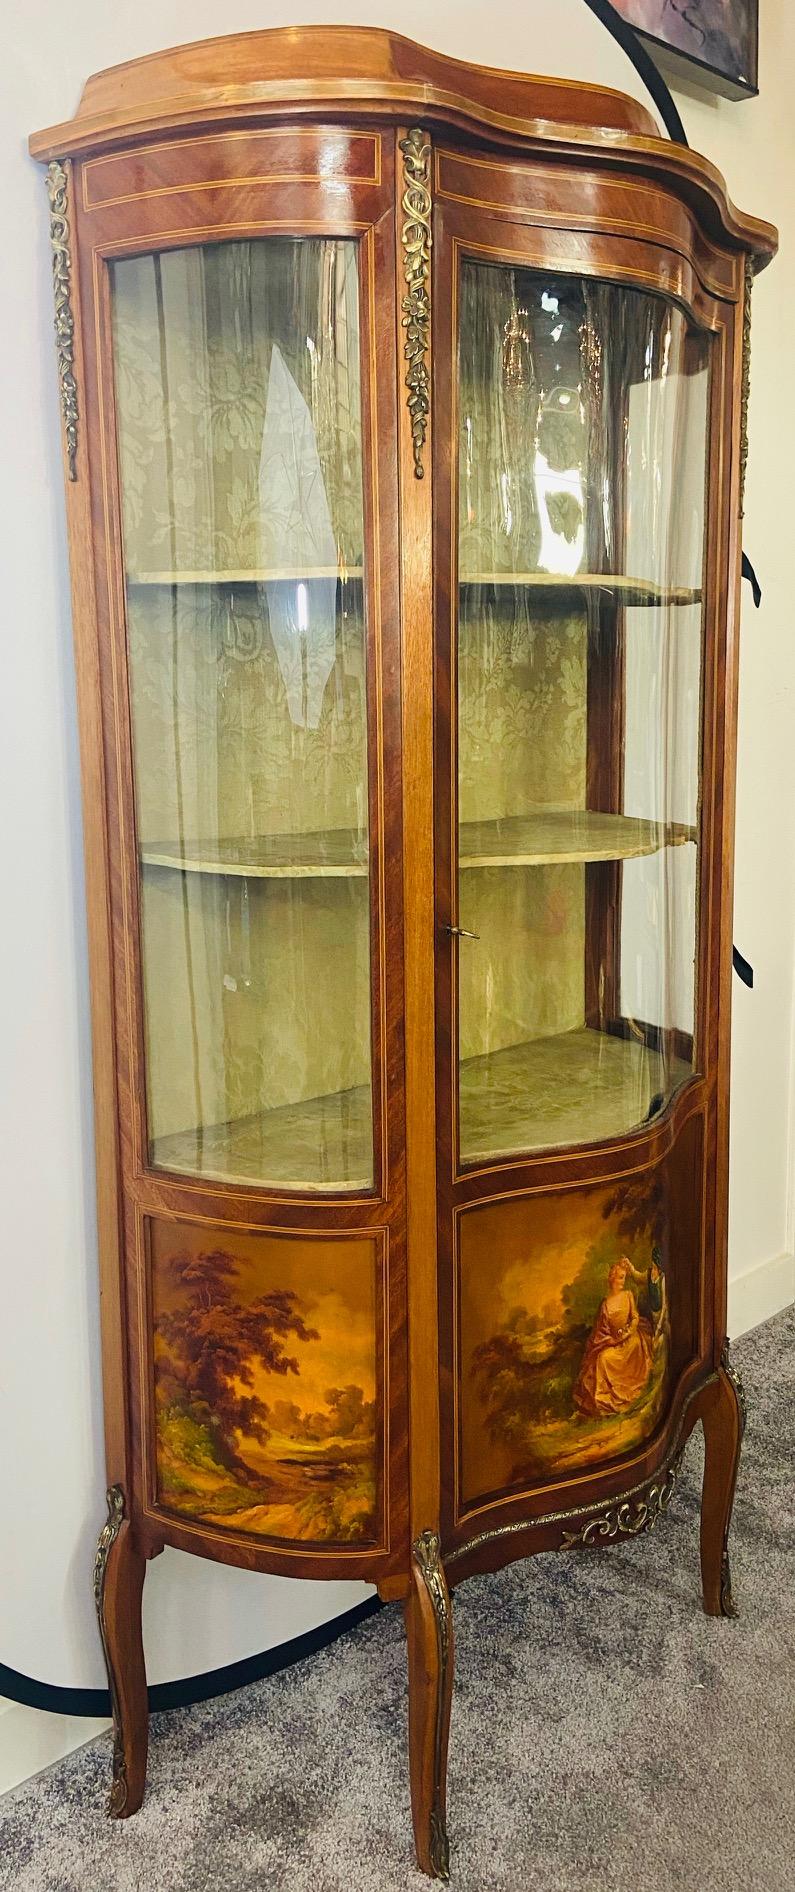 A quality antique French Louis XV style display cabinet or vitrine featuring acanthus and floral bronze mounted design and hand painted wood panels showing stunning landscape scenes as well as a portrait of a man and woman in the middle. With three